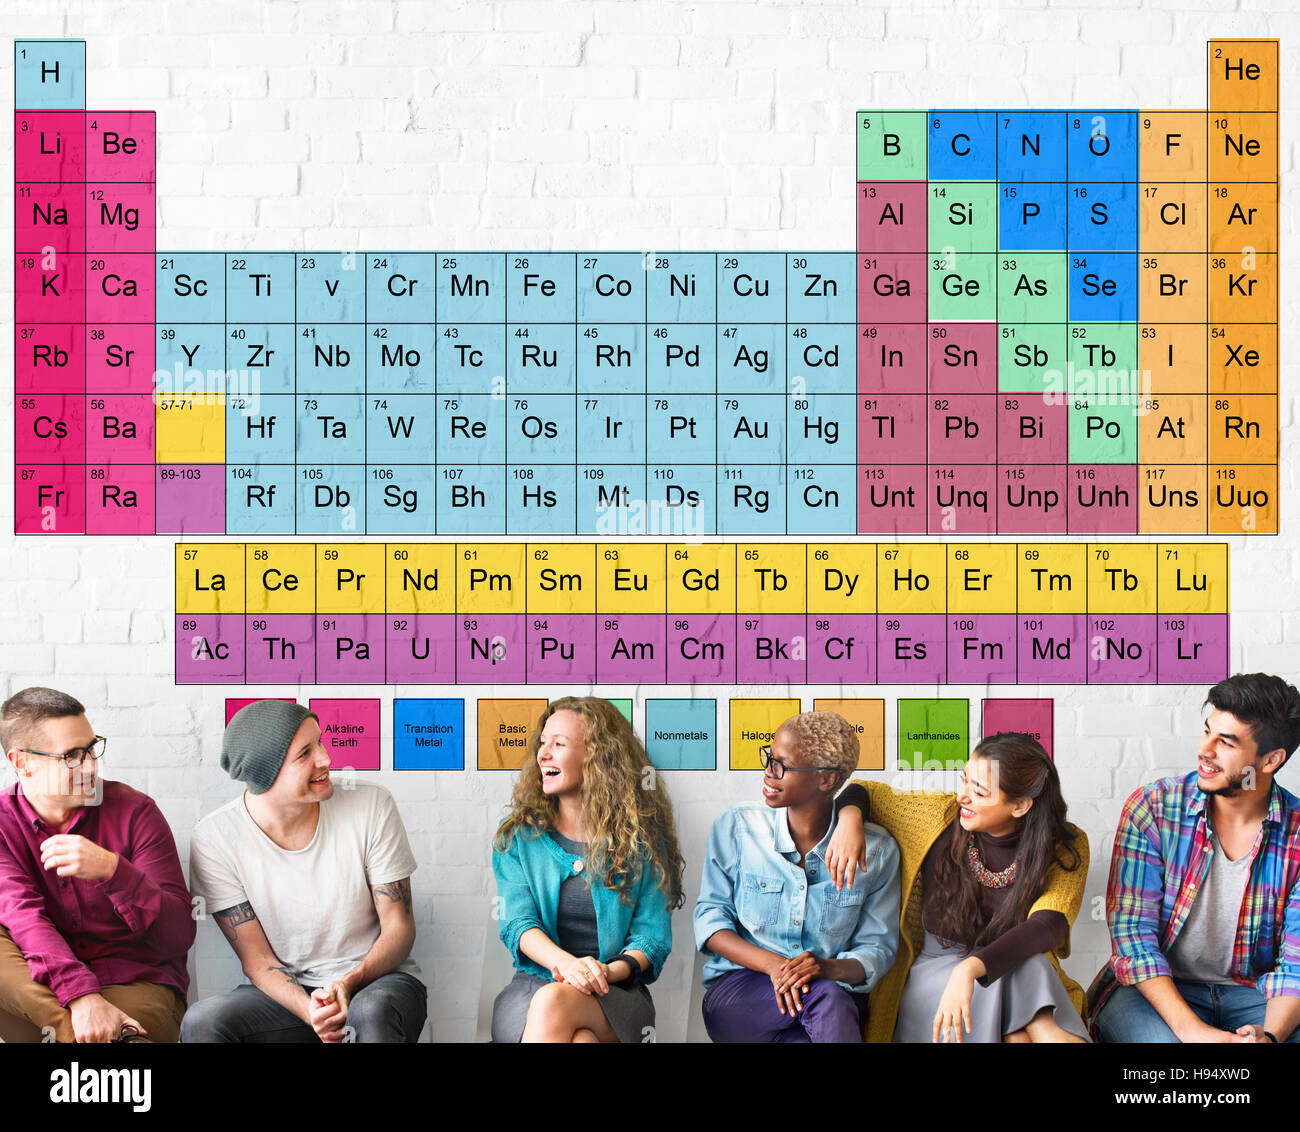 Periodic Table Chemical Chemistry Mendeleev Concept Stock Photo